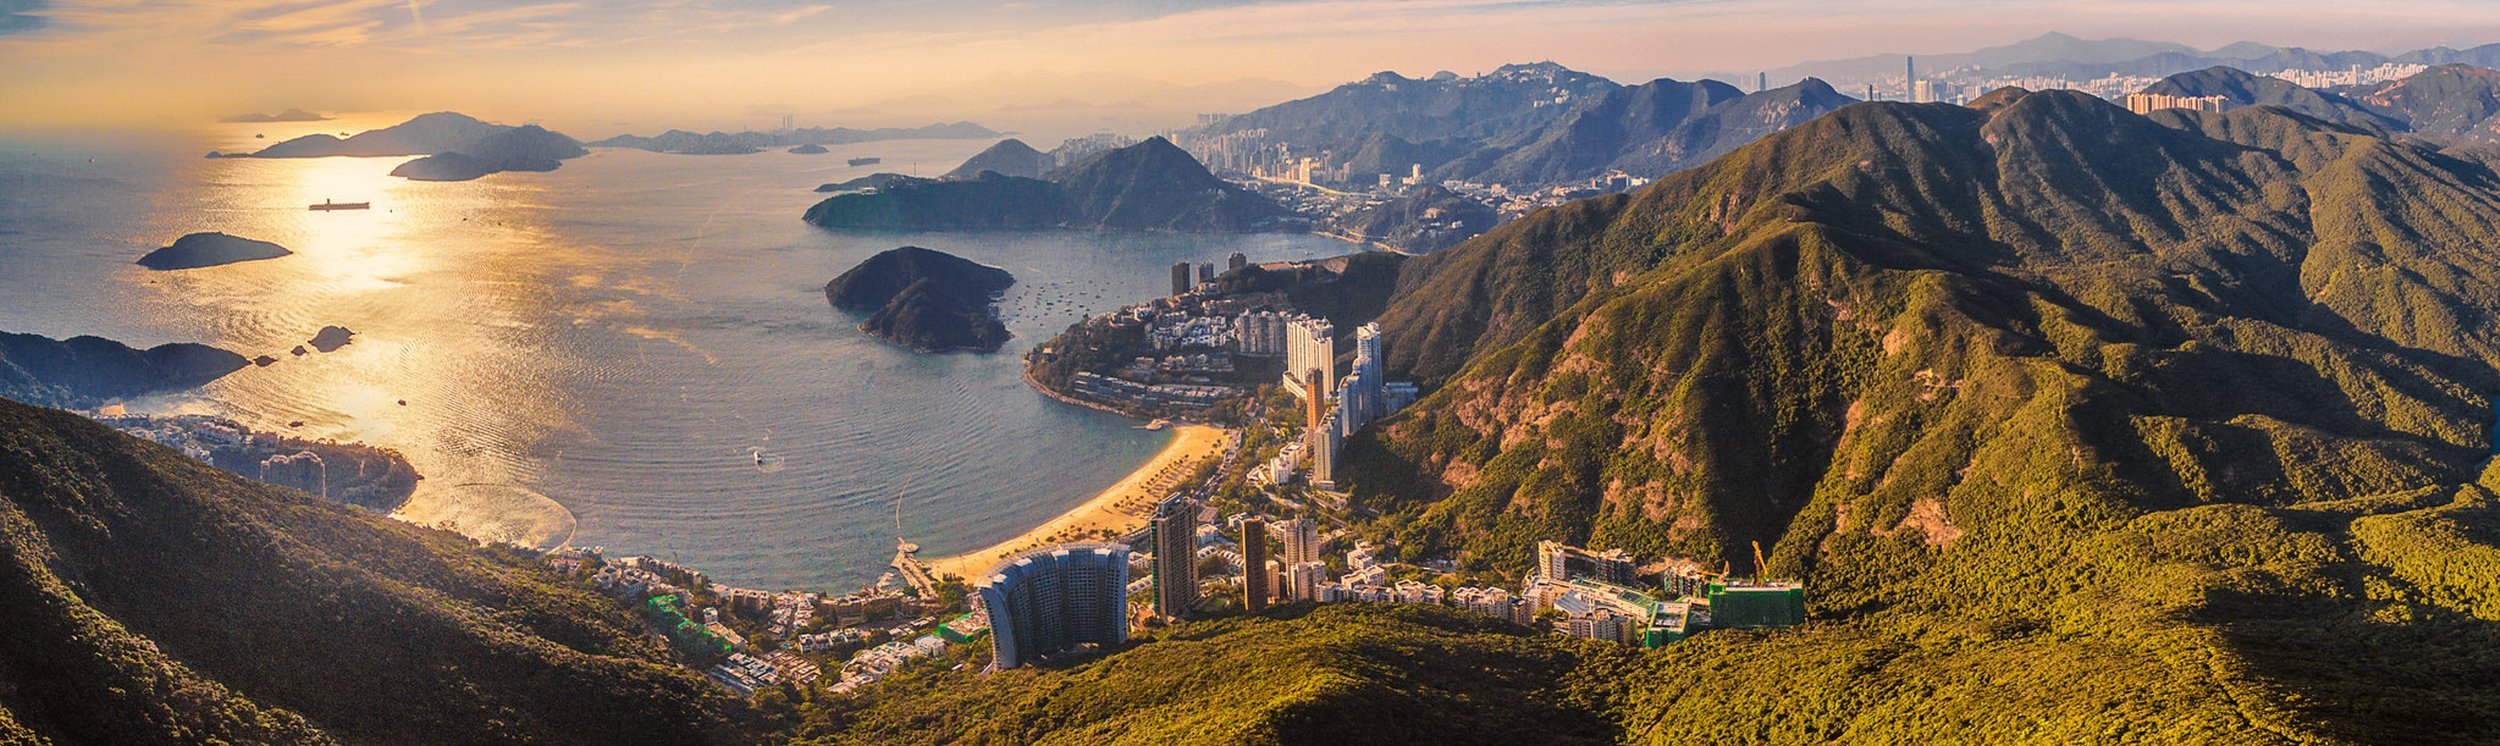 Discover Hong Kong From Above with these Hiking Trails - FATMAP